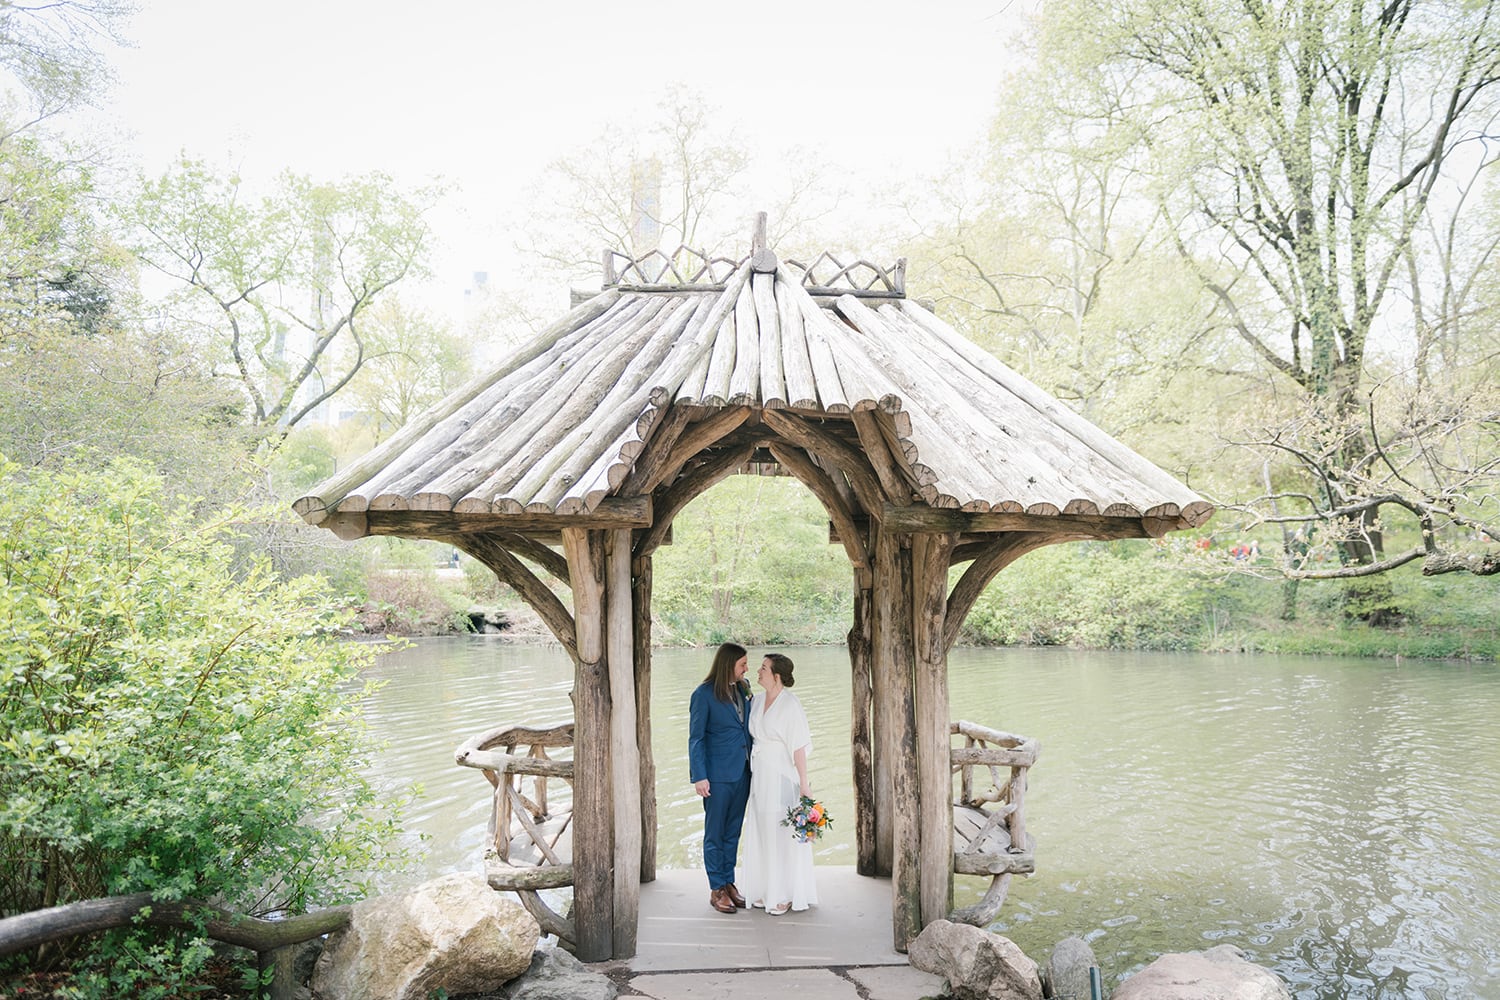 Wagner Cove wedding in Central Park, NYC